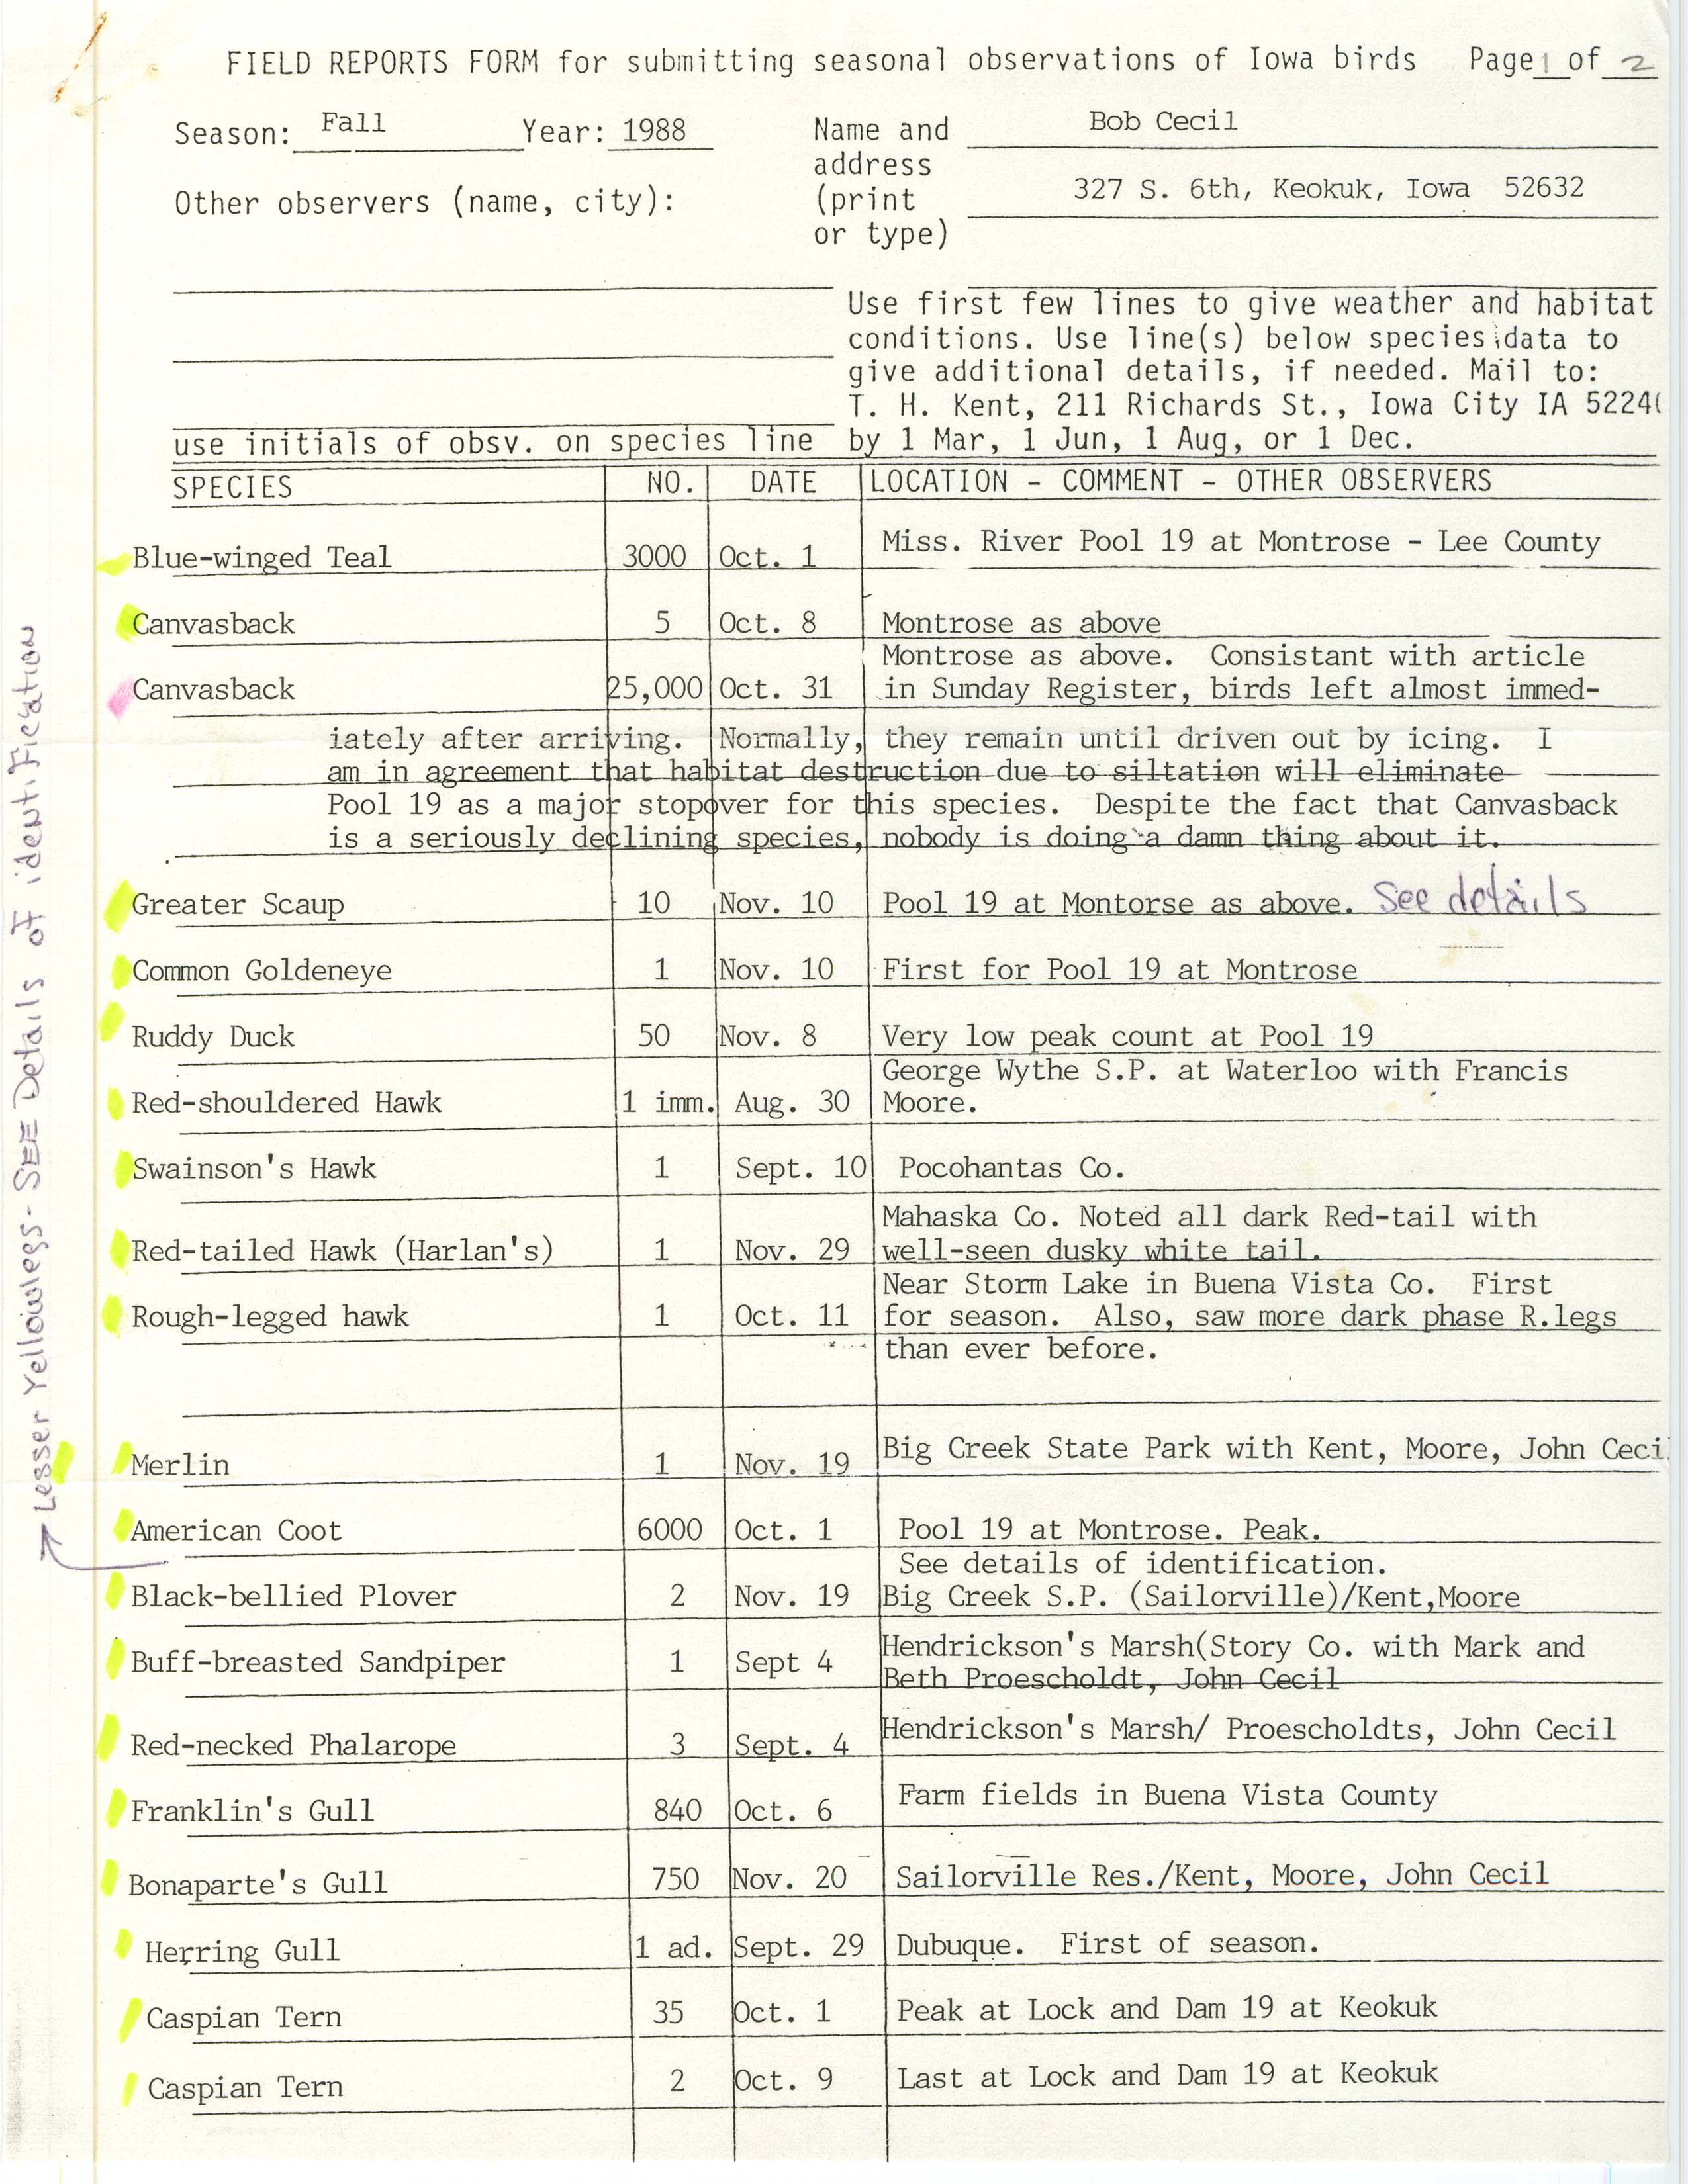 Field reports form for submitting seasonal observations of Iowa birds, Robert I. Cecil, fall 1988